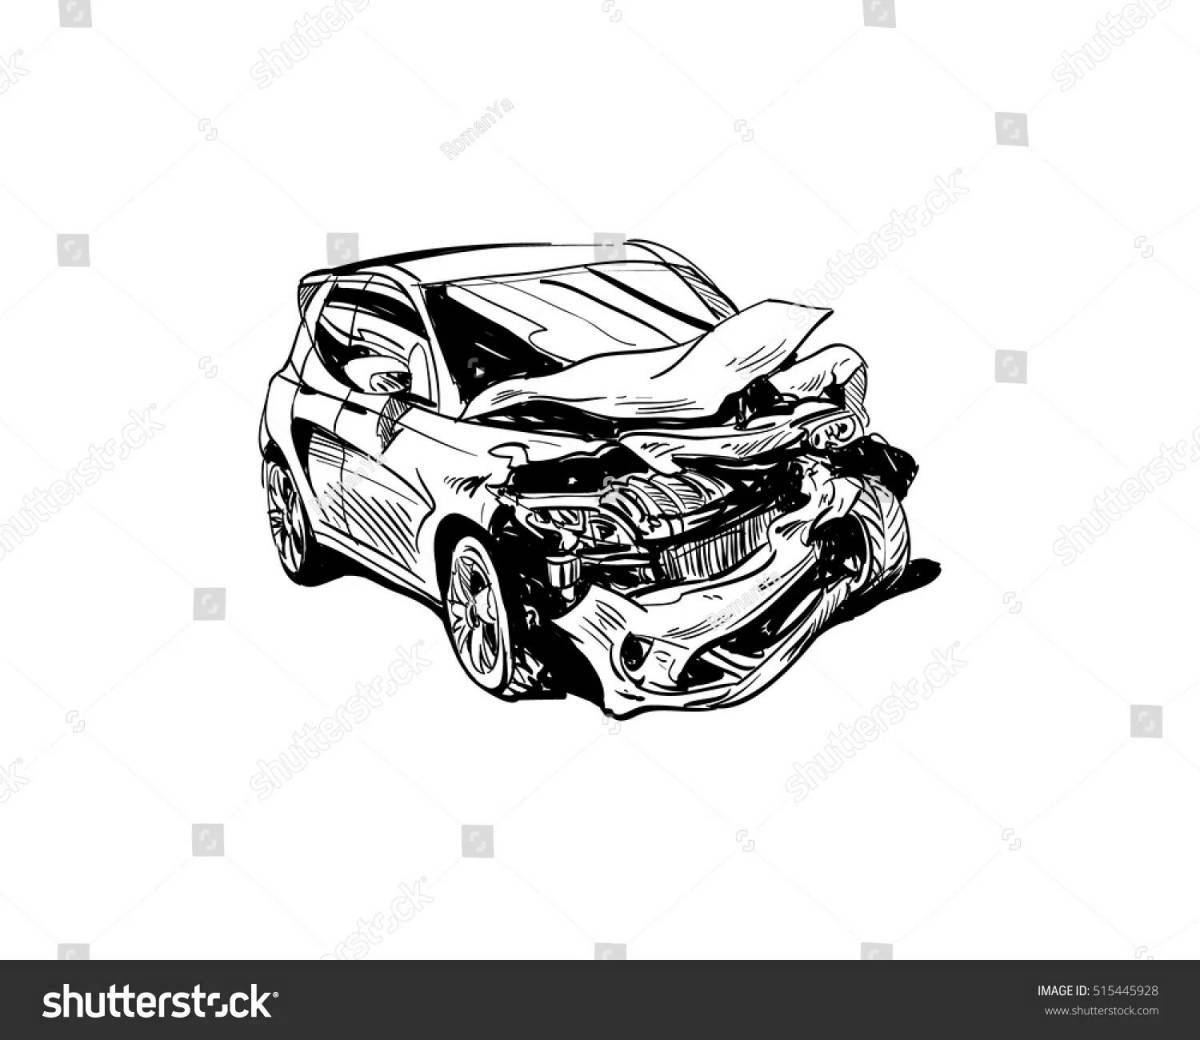 Coloring page elegant wrecked cars